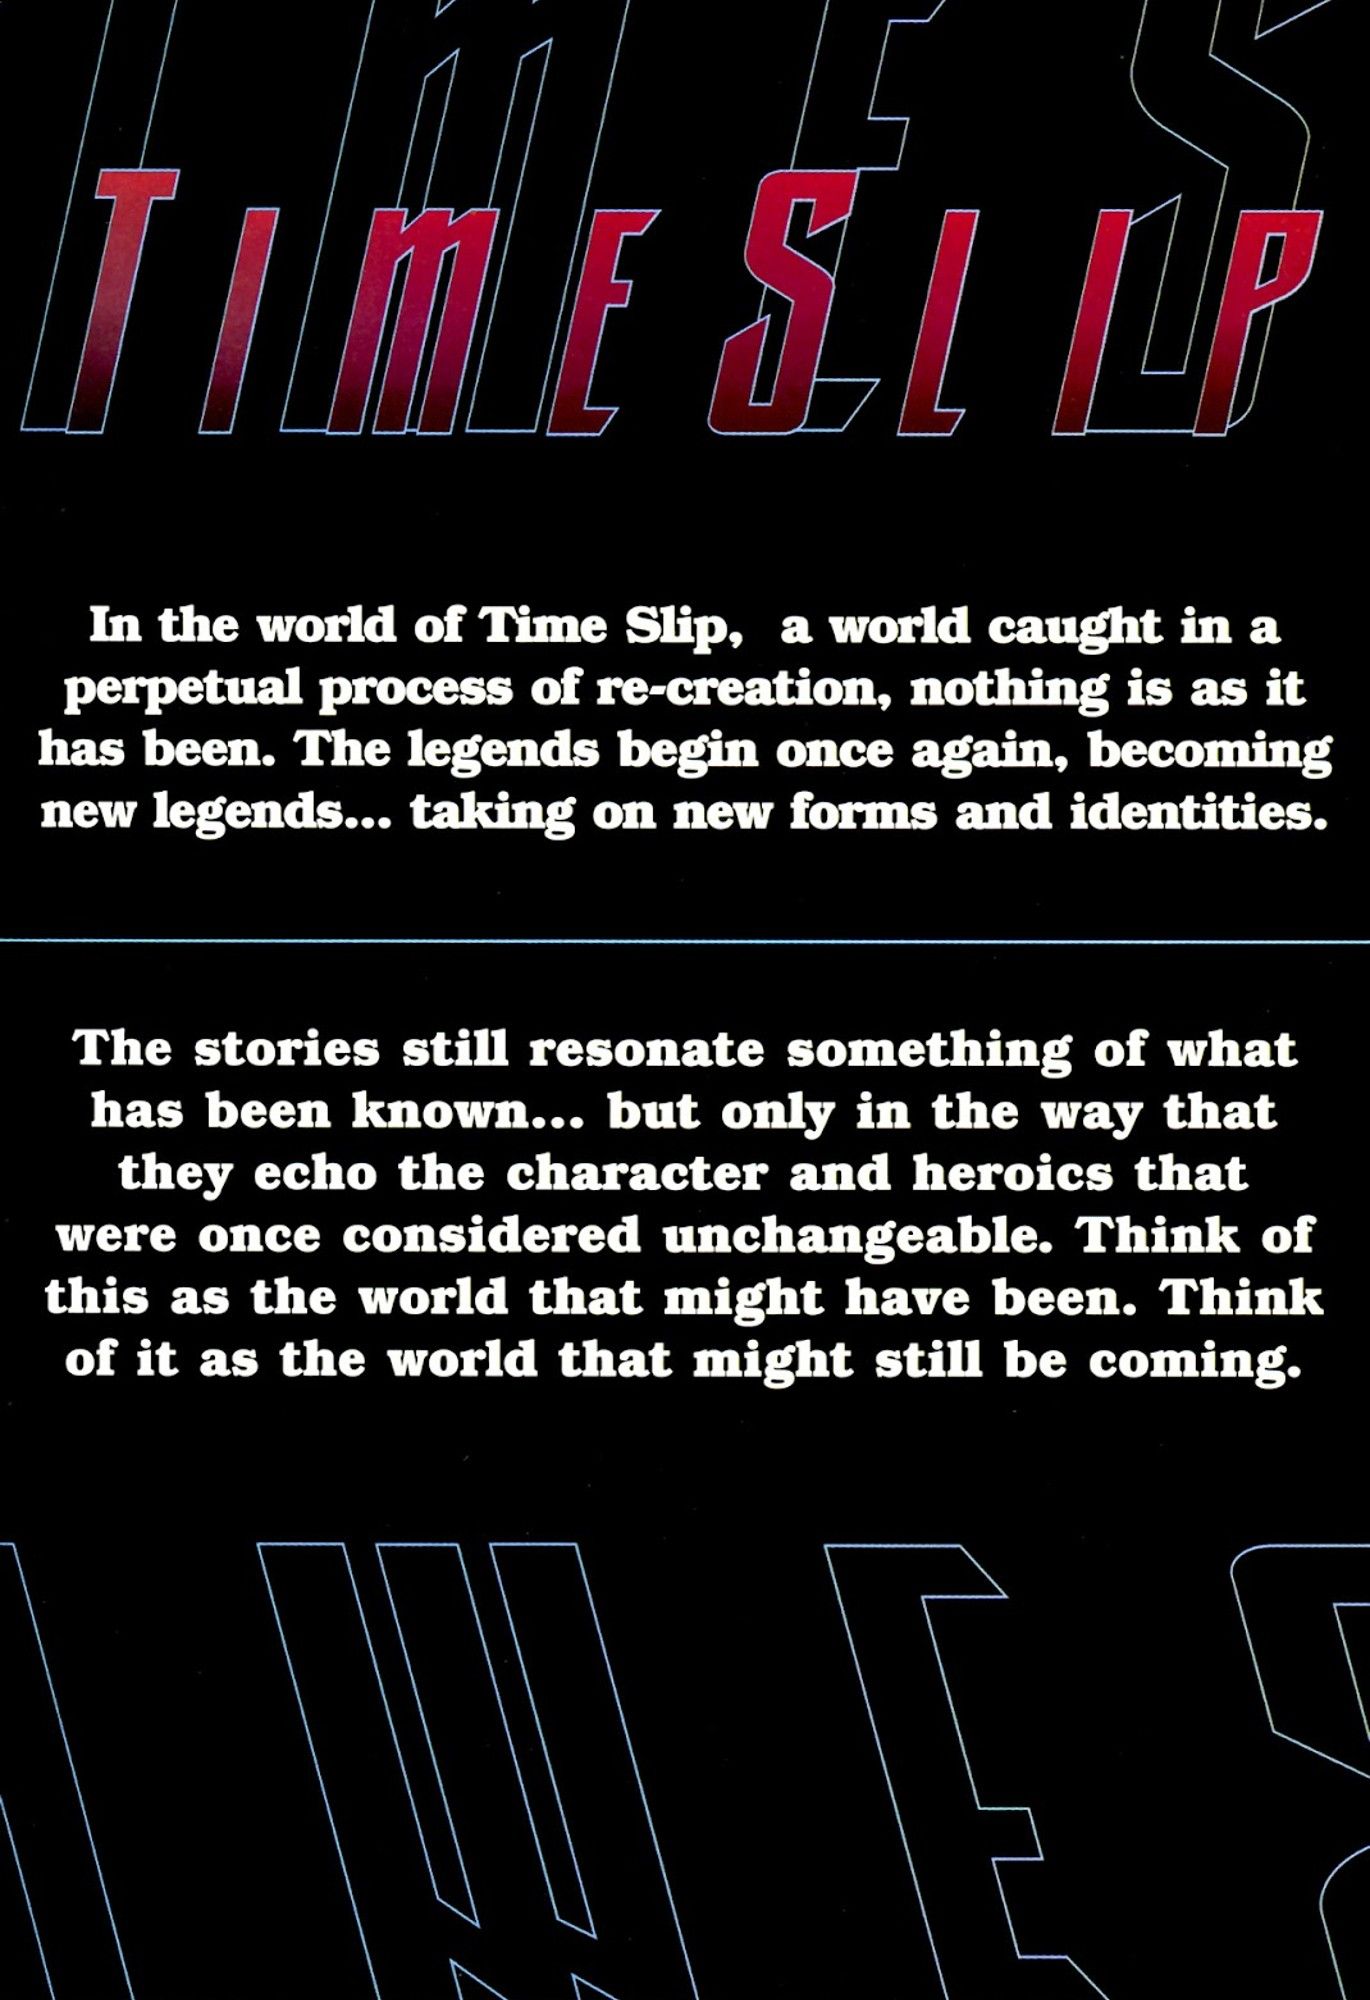 Timeslip Marvel explanation text page